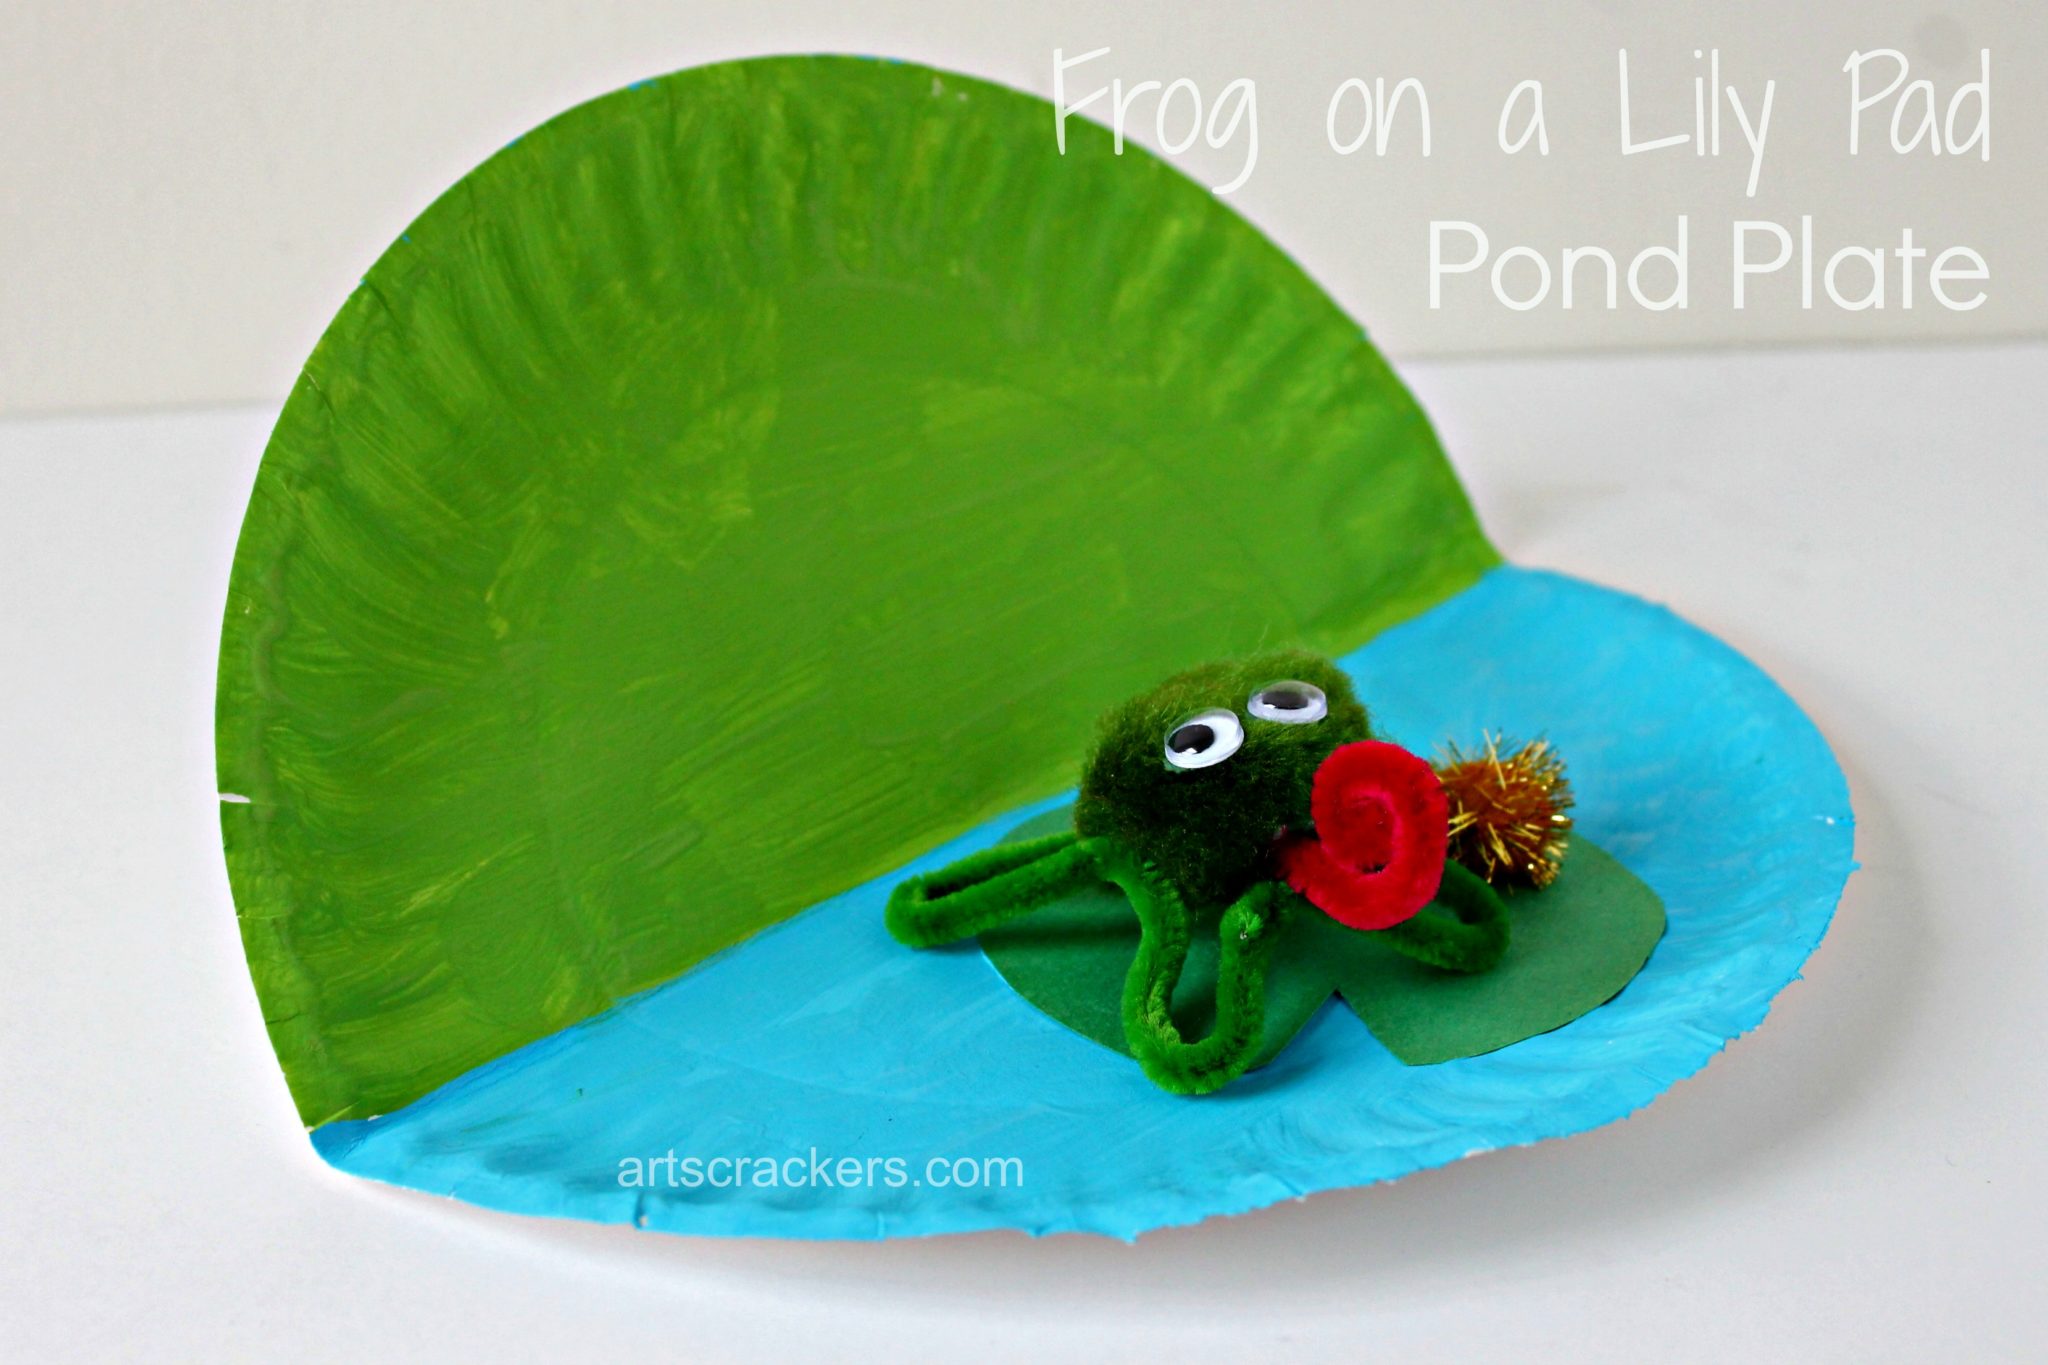 Frog on a Lily Pad Pond Plate. Click the picture to read the instructions and get bonus ideas.